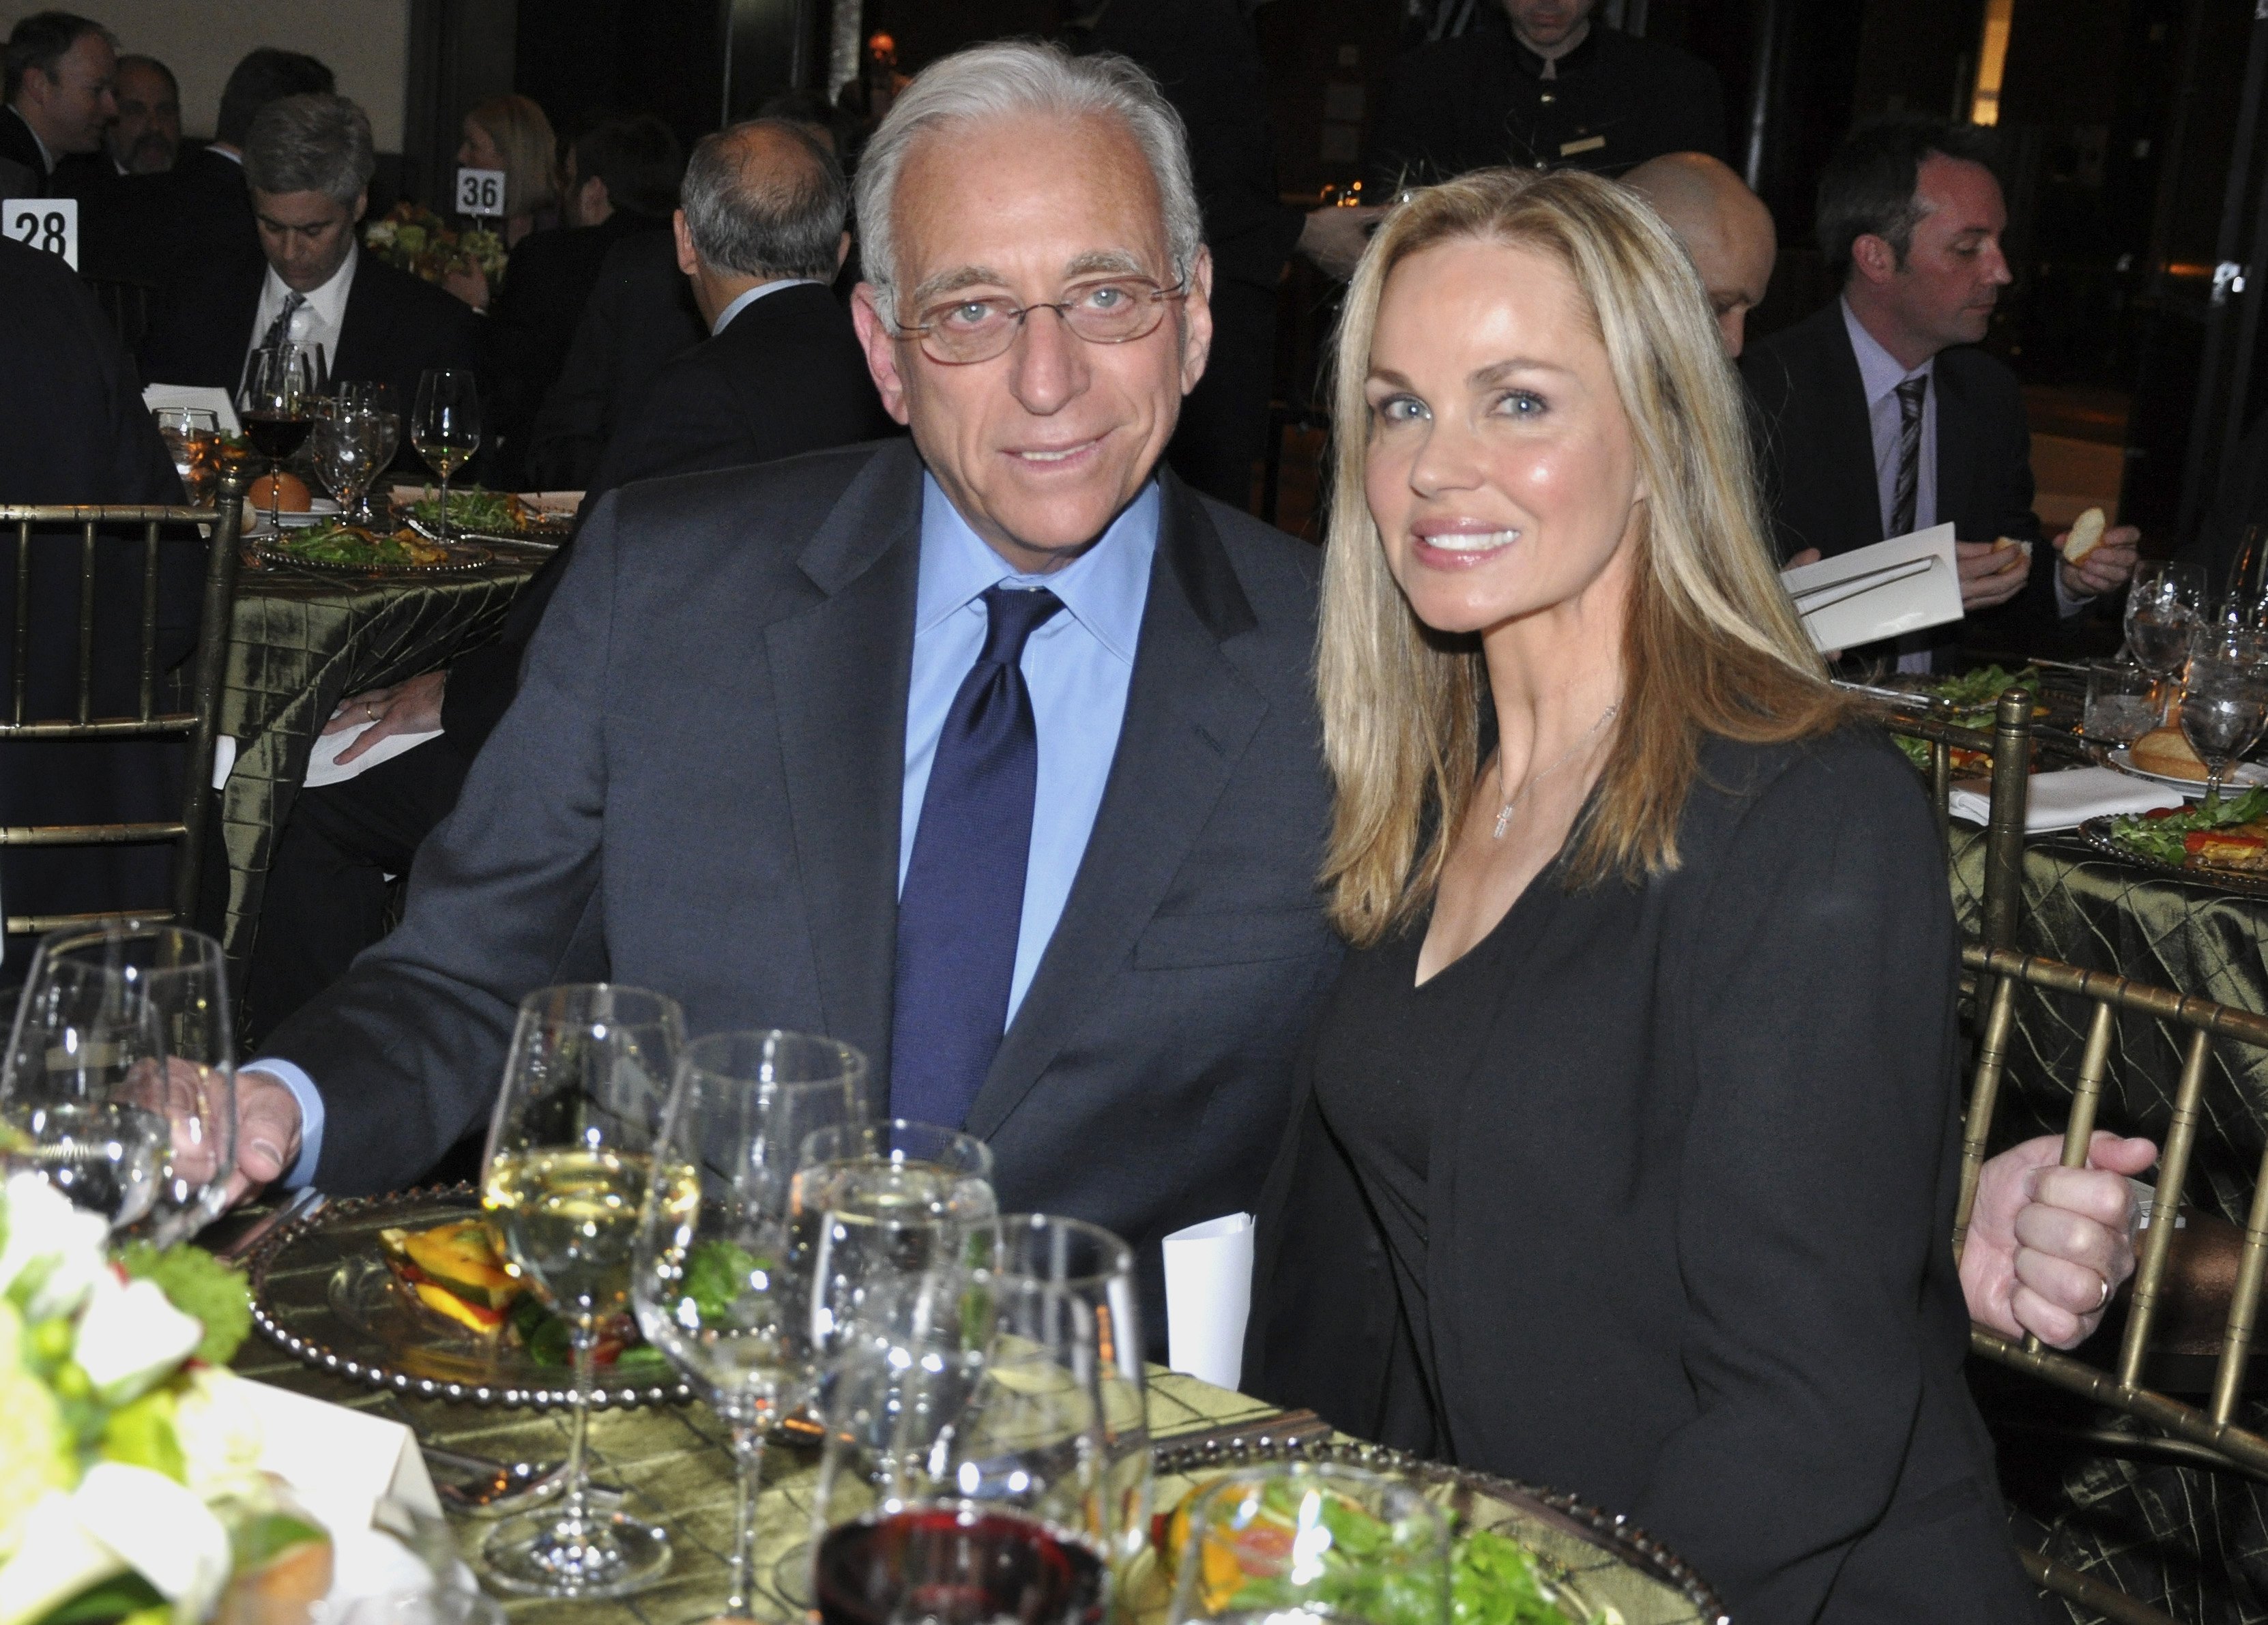 Nelson Peltz and Claudia Peltz are pictured at the Simon Wiesenthal Center's Humanitarian Award Dinner at the Mandarin Oriental Hotel on March 28, 2011, in New York City | Source: Getty Images